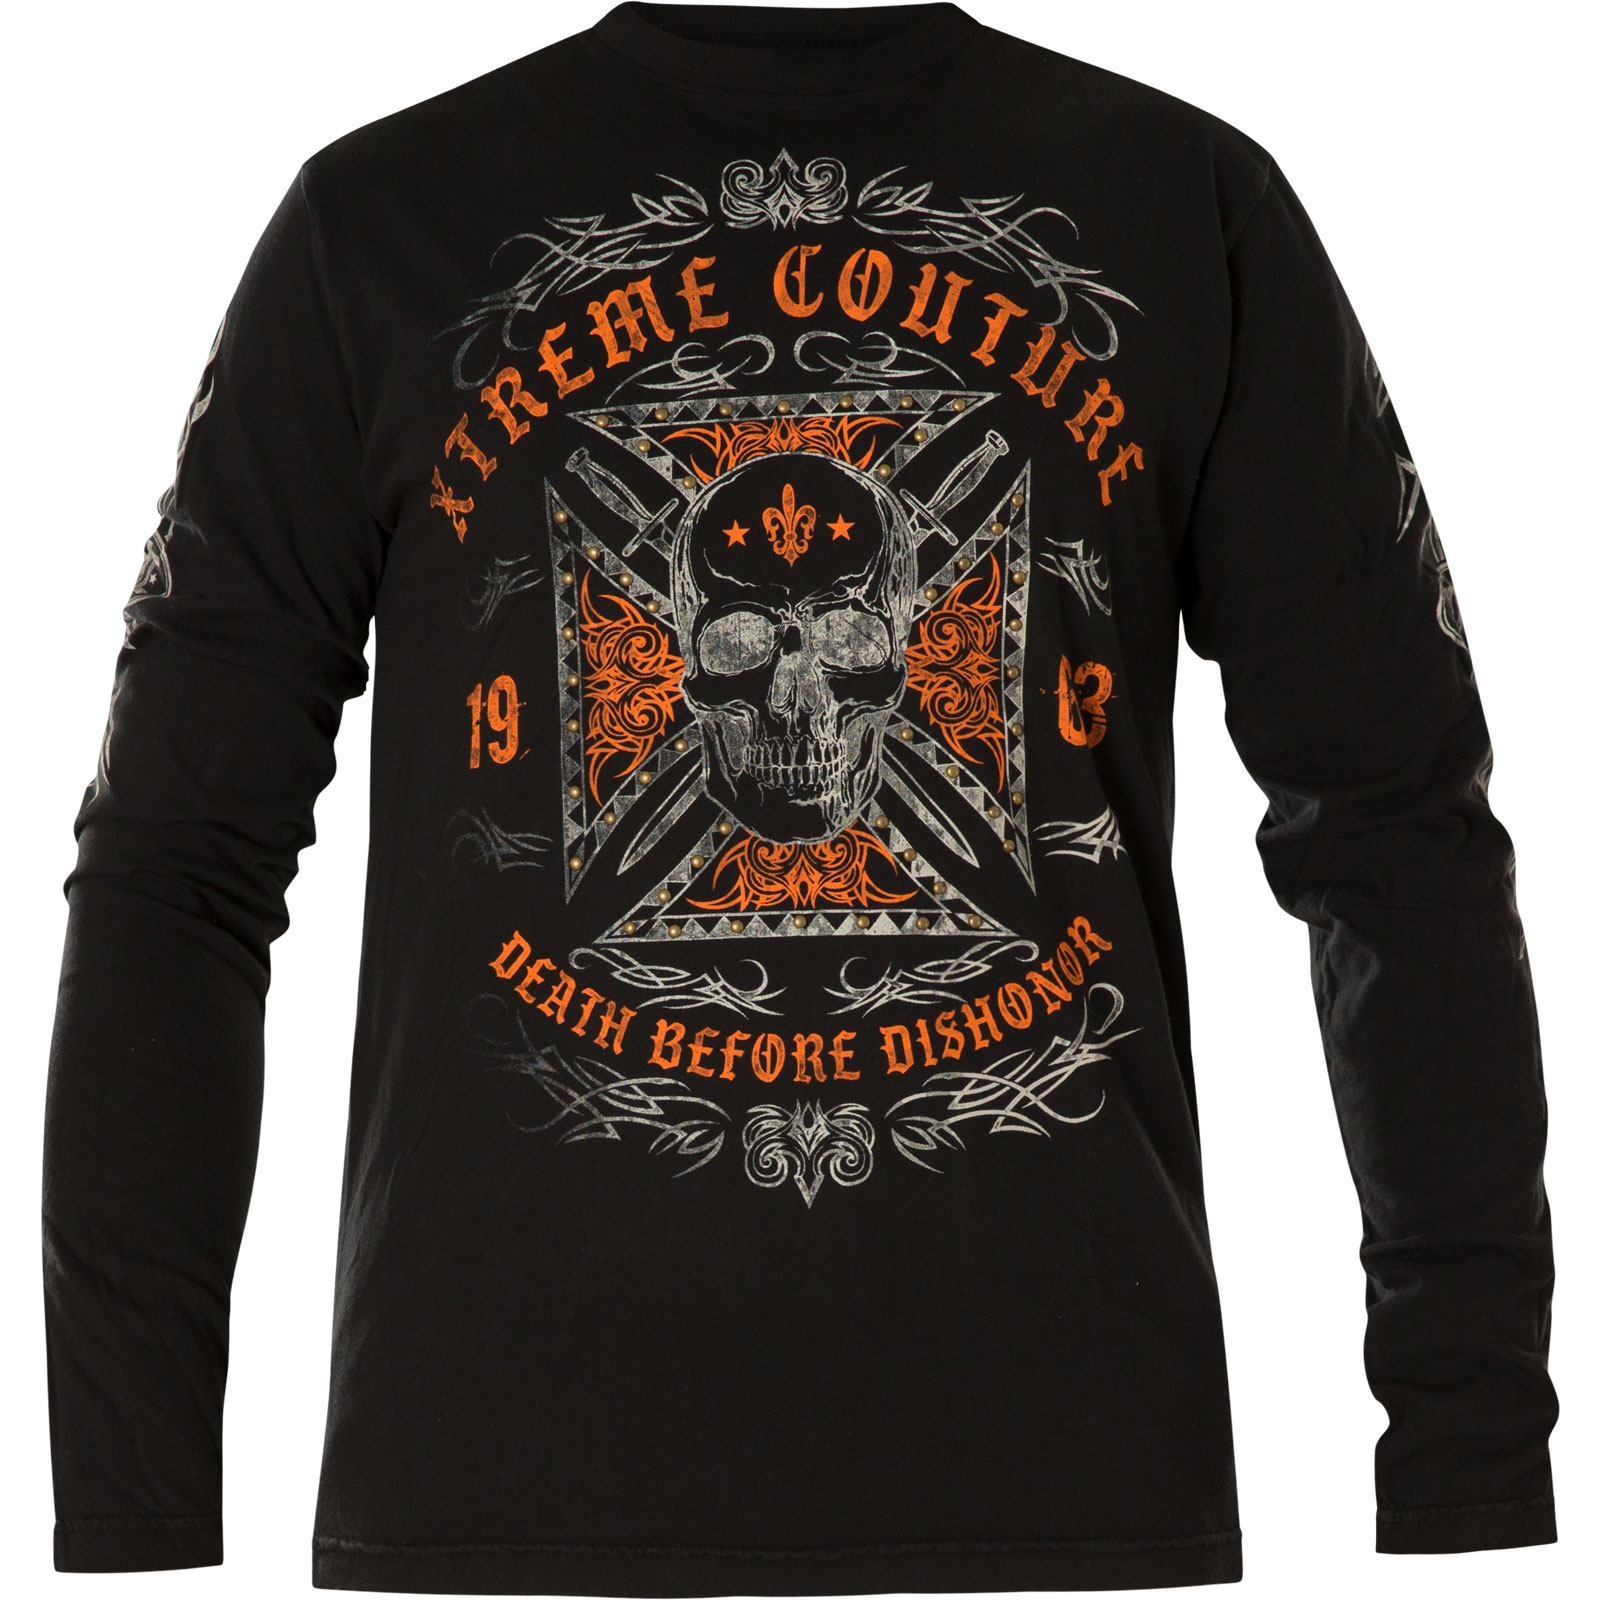 xtreme-couture-by-affliction-thermal-immortal-speed-print-with-a-skull